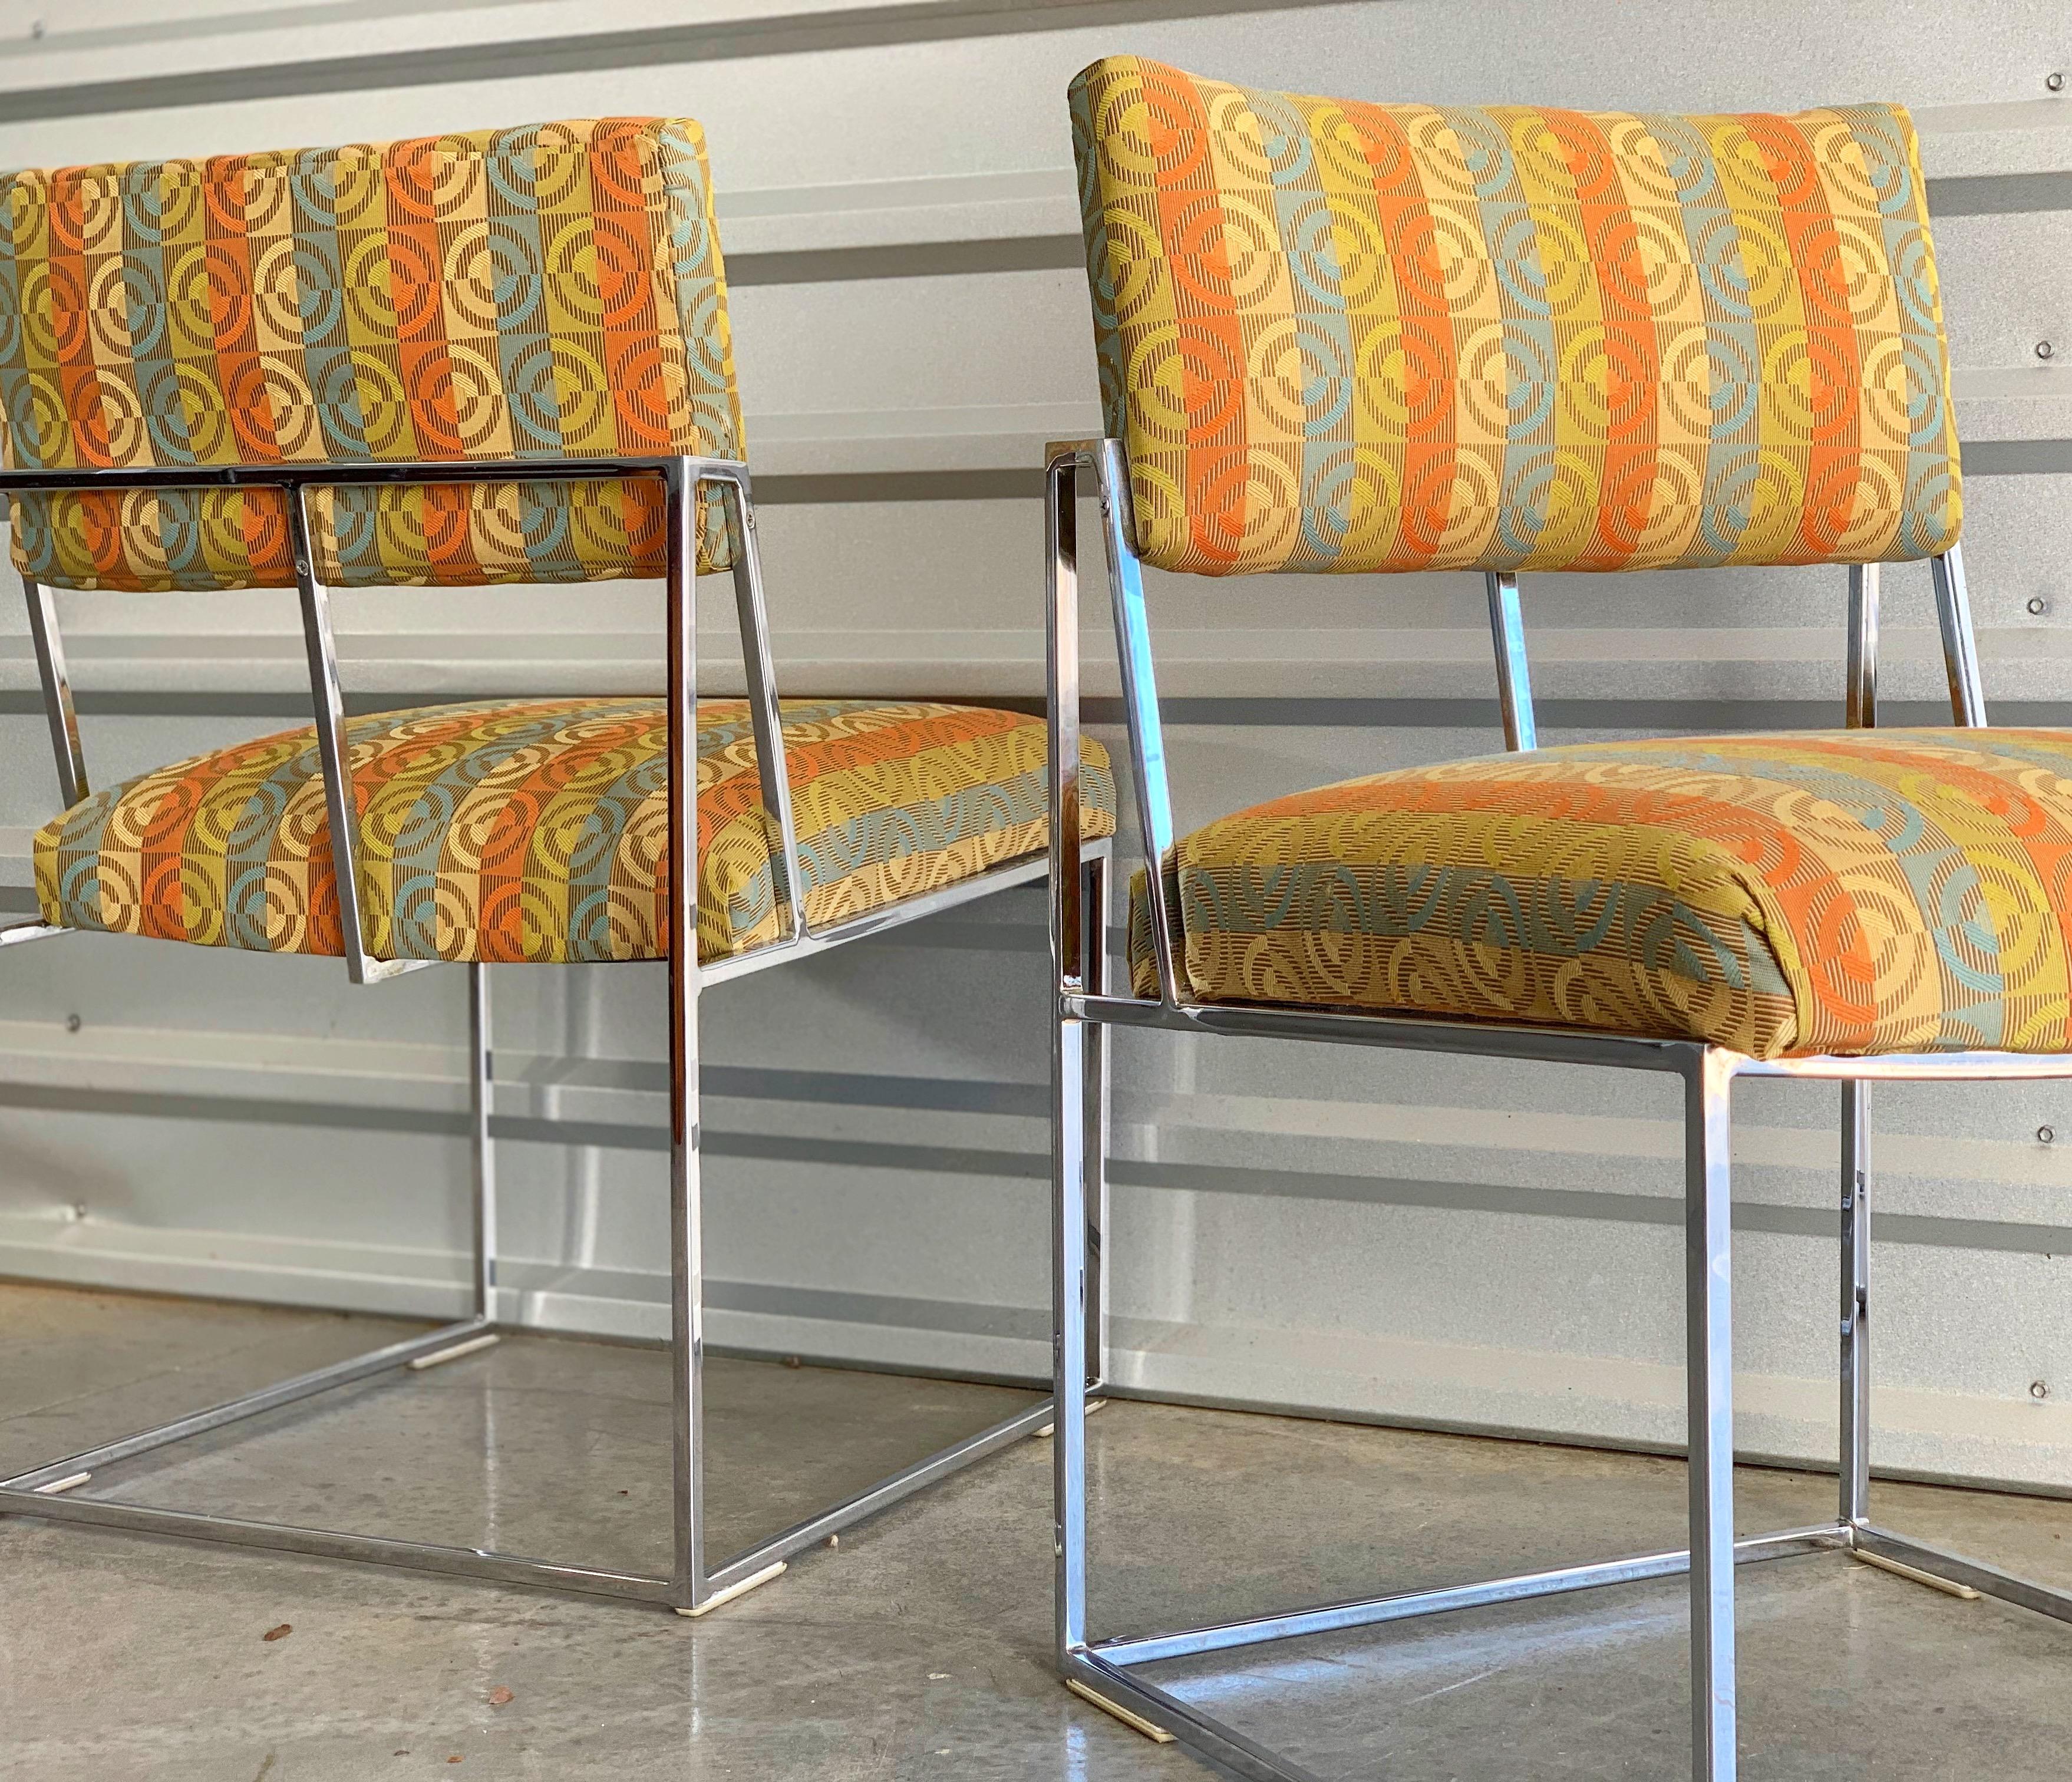 Set of 4 Mid-Century Modern dining chairs in chromed steel by Milo Baughman for Thayer Coggin. Model 1188-110, early circa 1970s. The model 1188 is rumored to be Baughman's favorite chair design of his career. Chrome frames are sound and show very